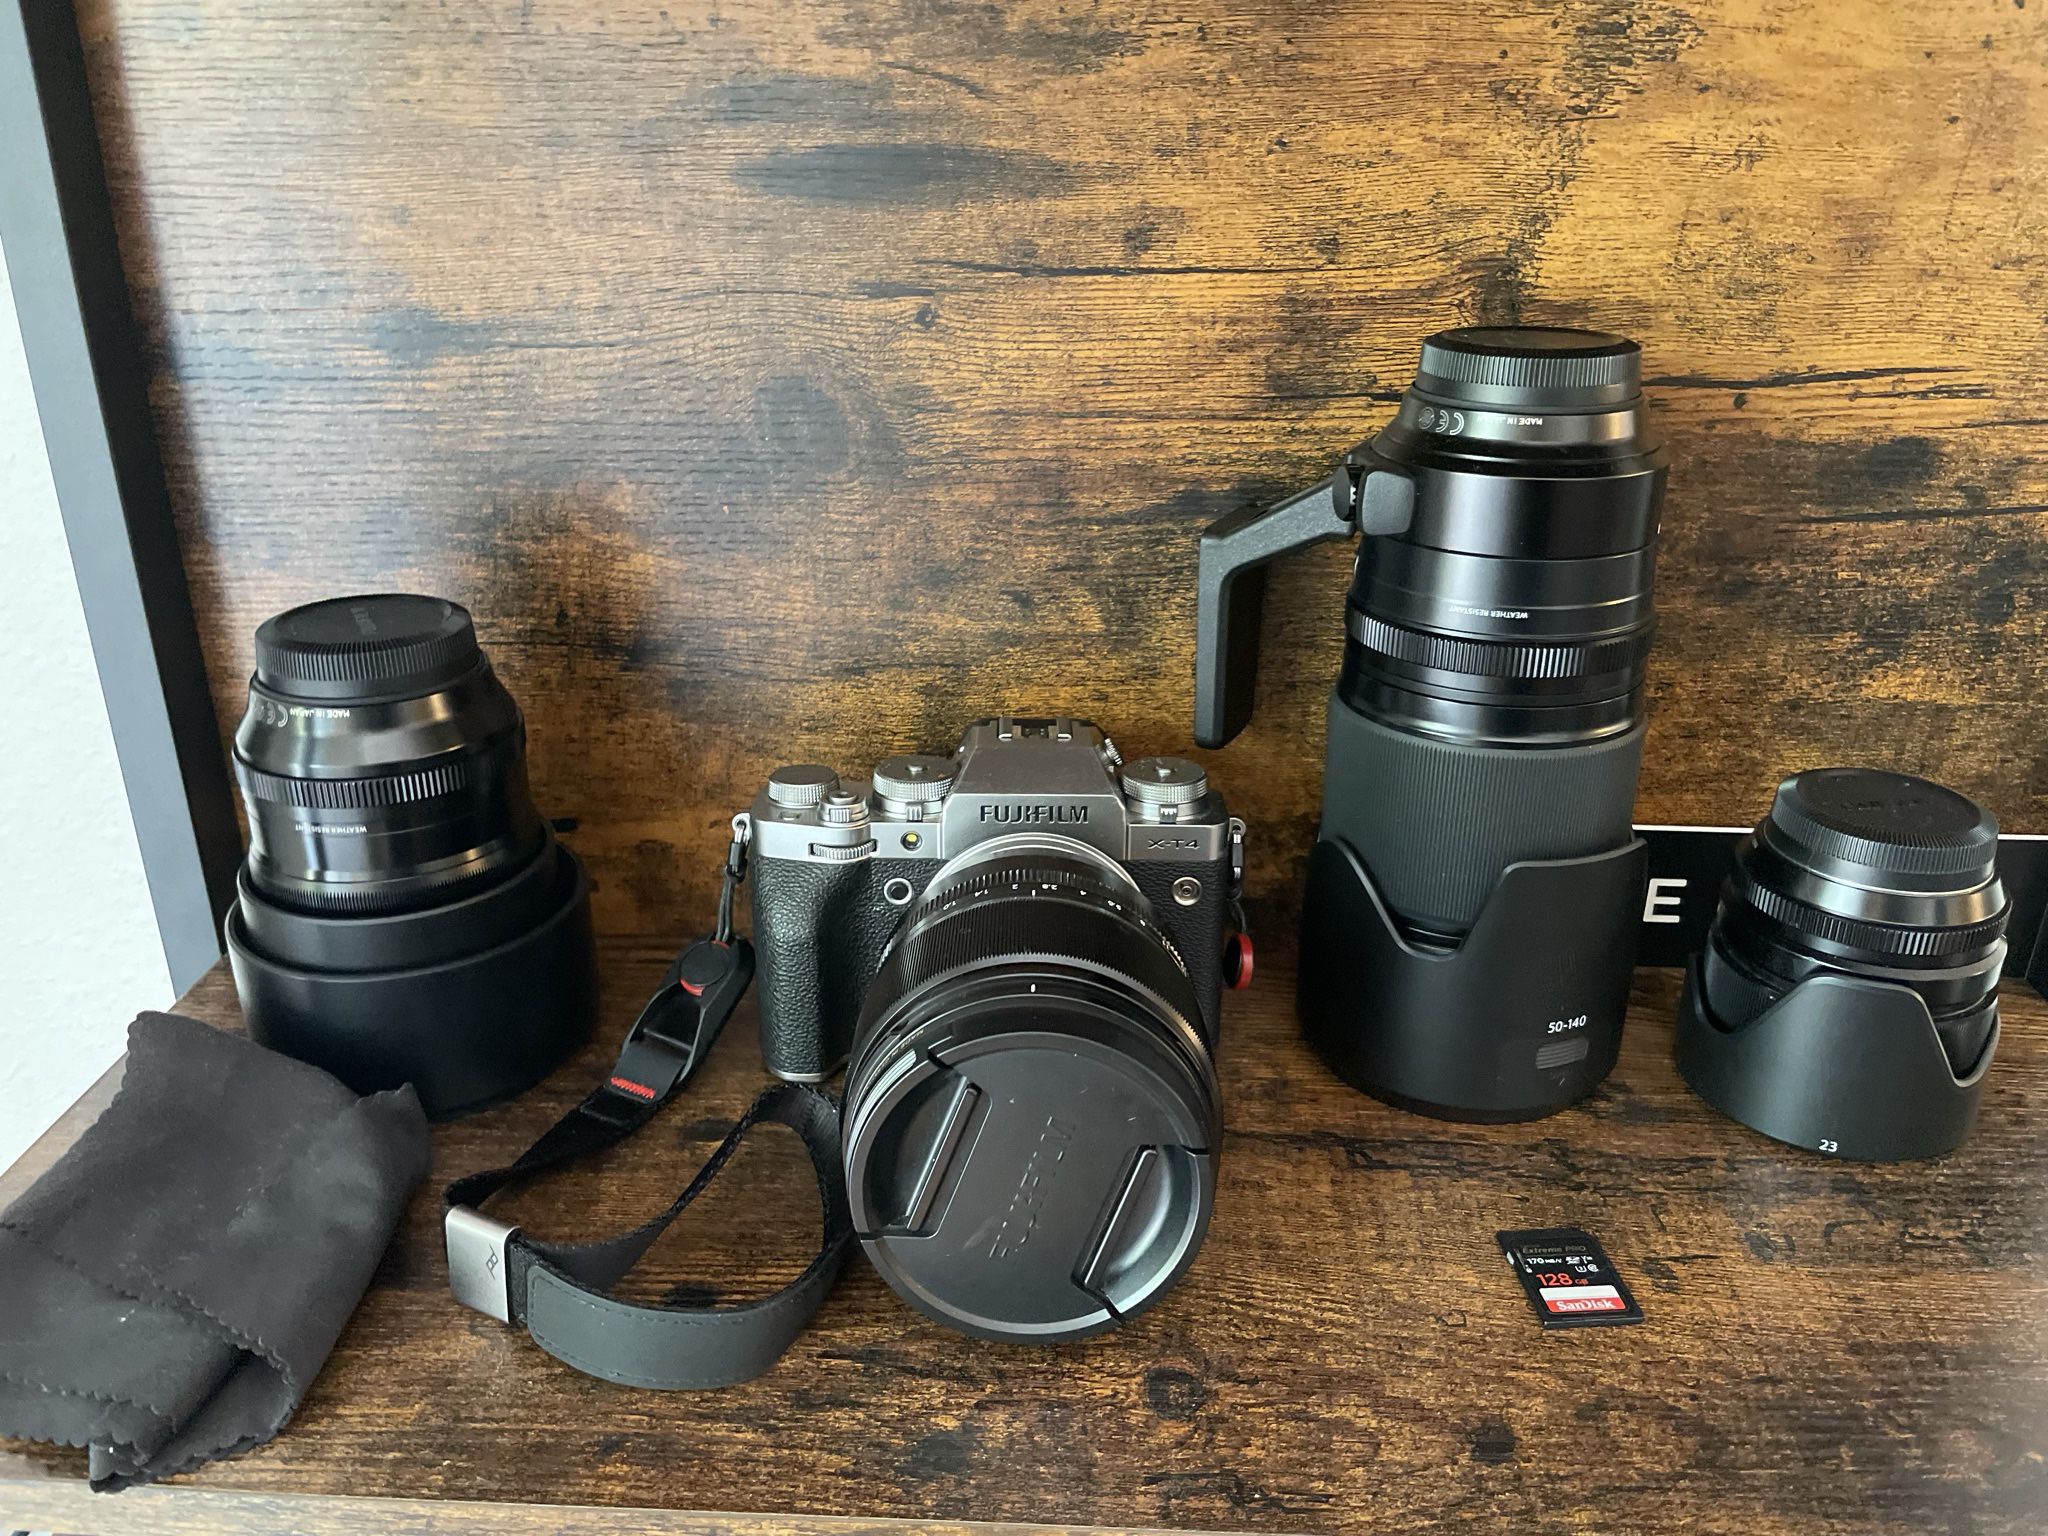 Complete Fujifilm XT4 in original Packaging $1400 With Extra battery, Filters, Also Selling Lenses 